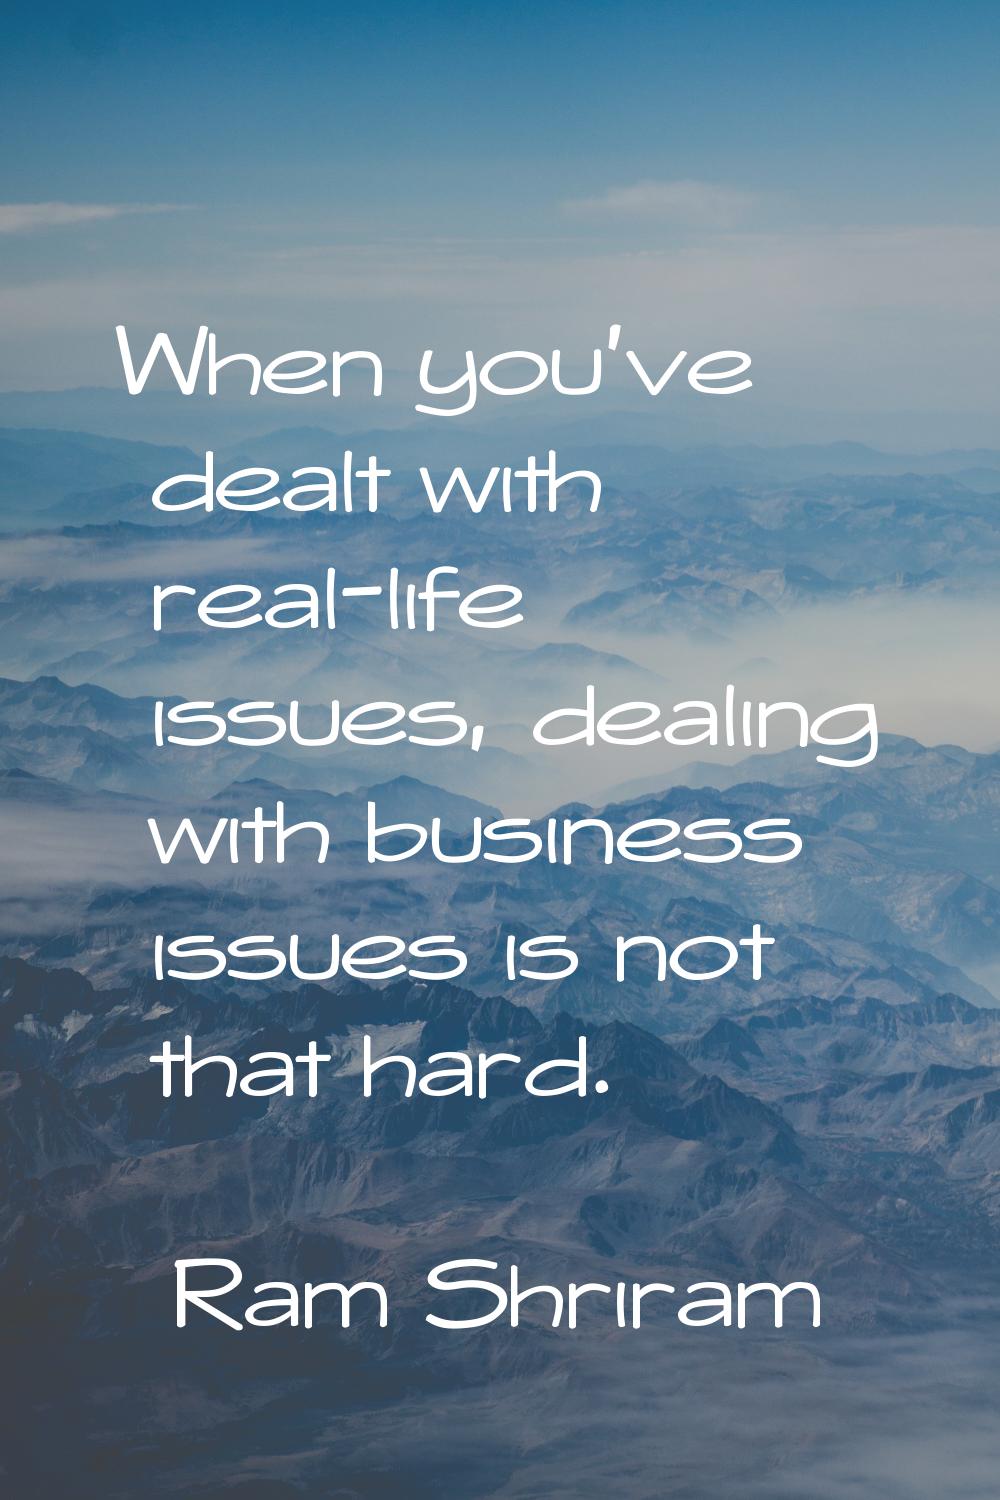 When you've dealt with real-life issues, dealing with business issues is not that hard.